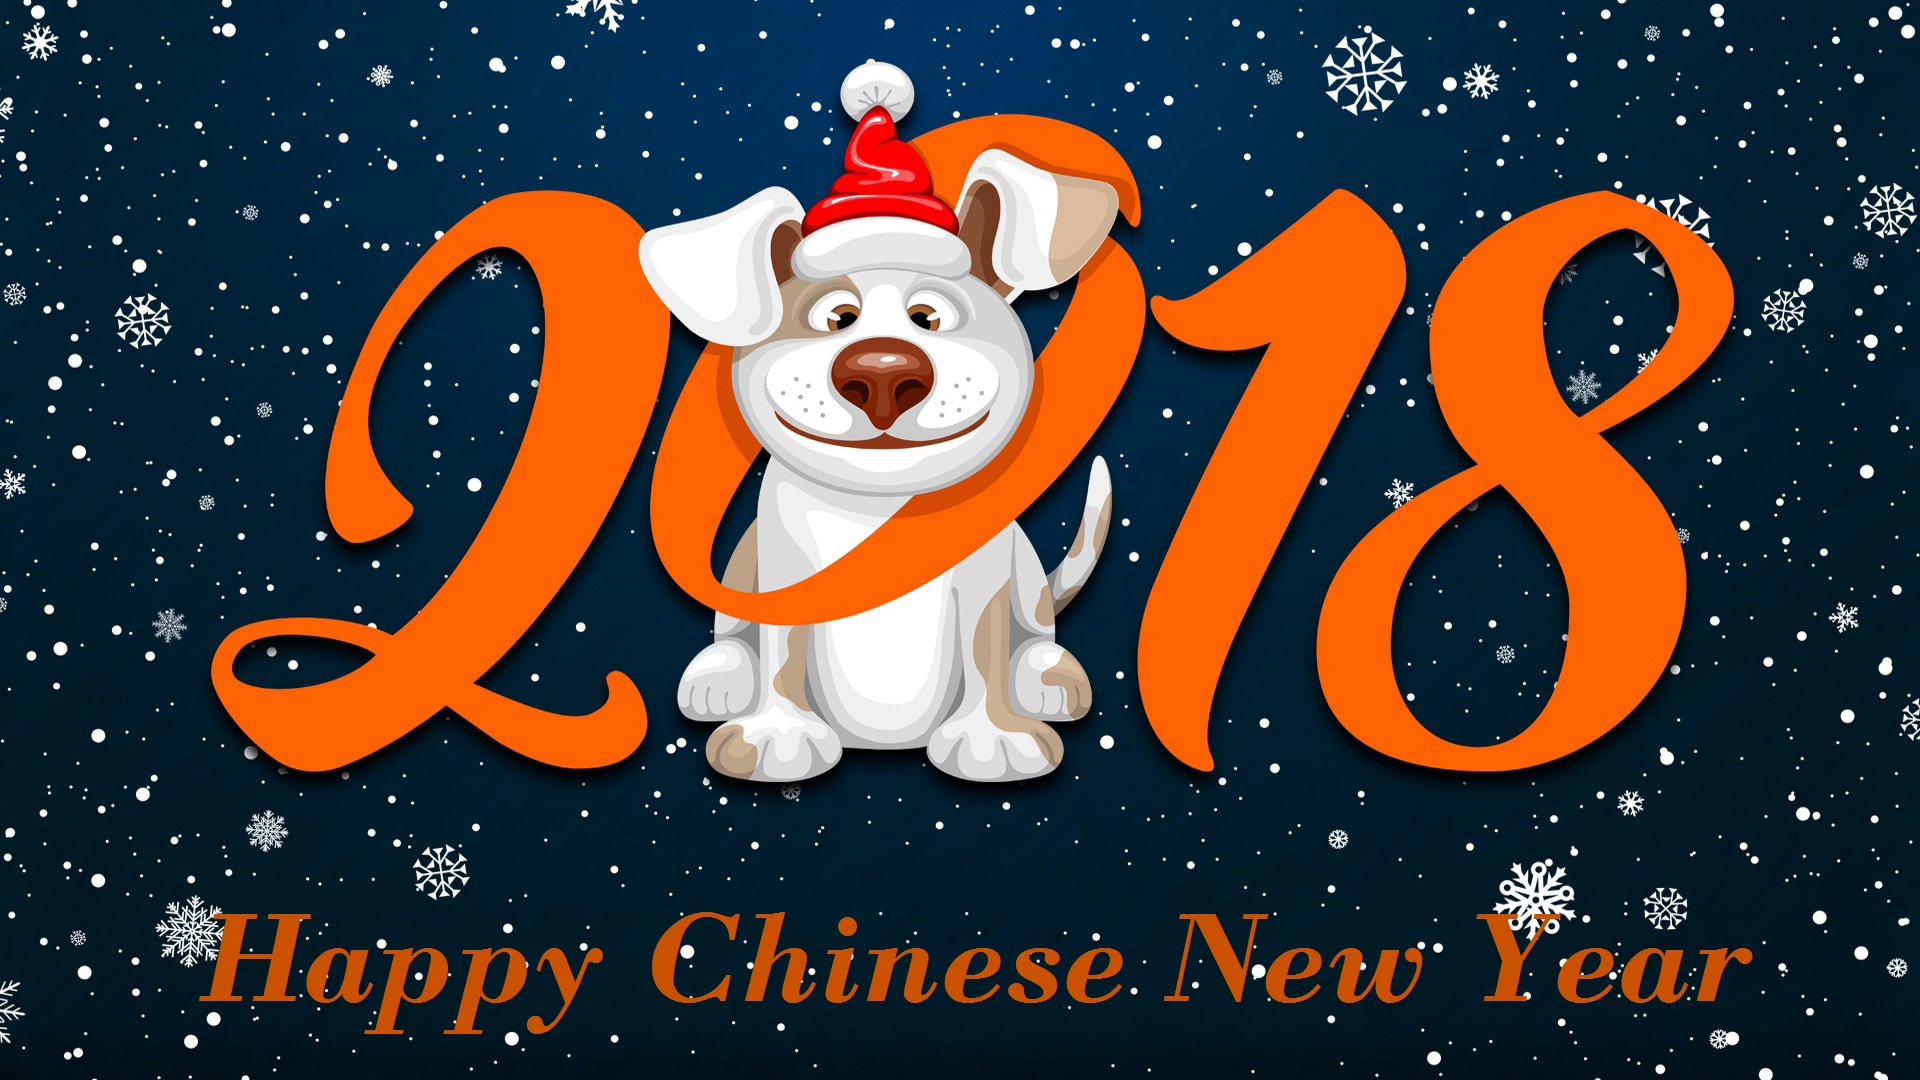 happy chinese new year greetings image